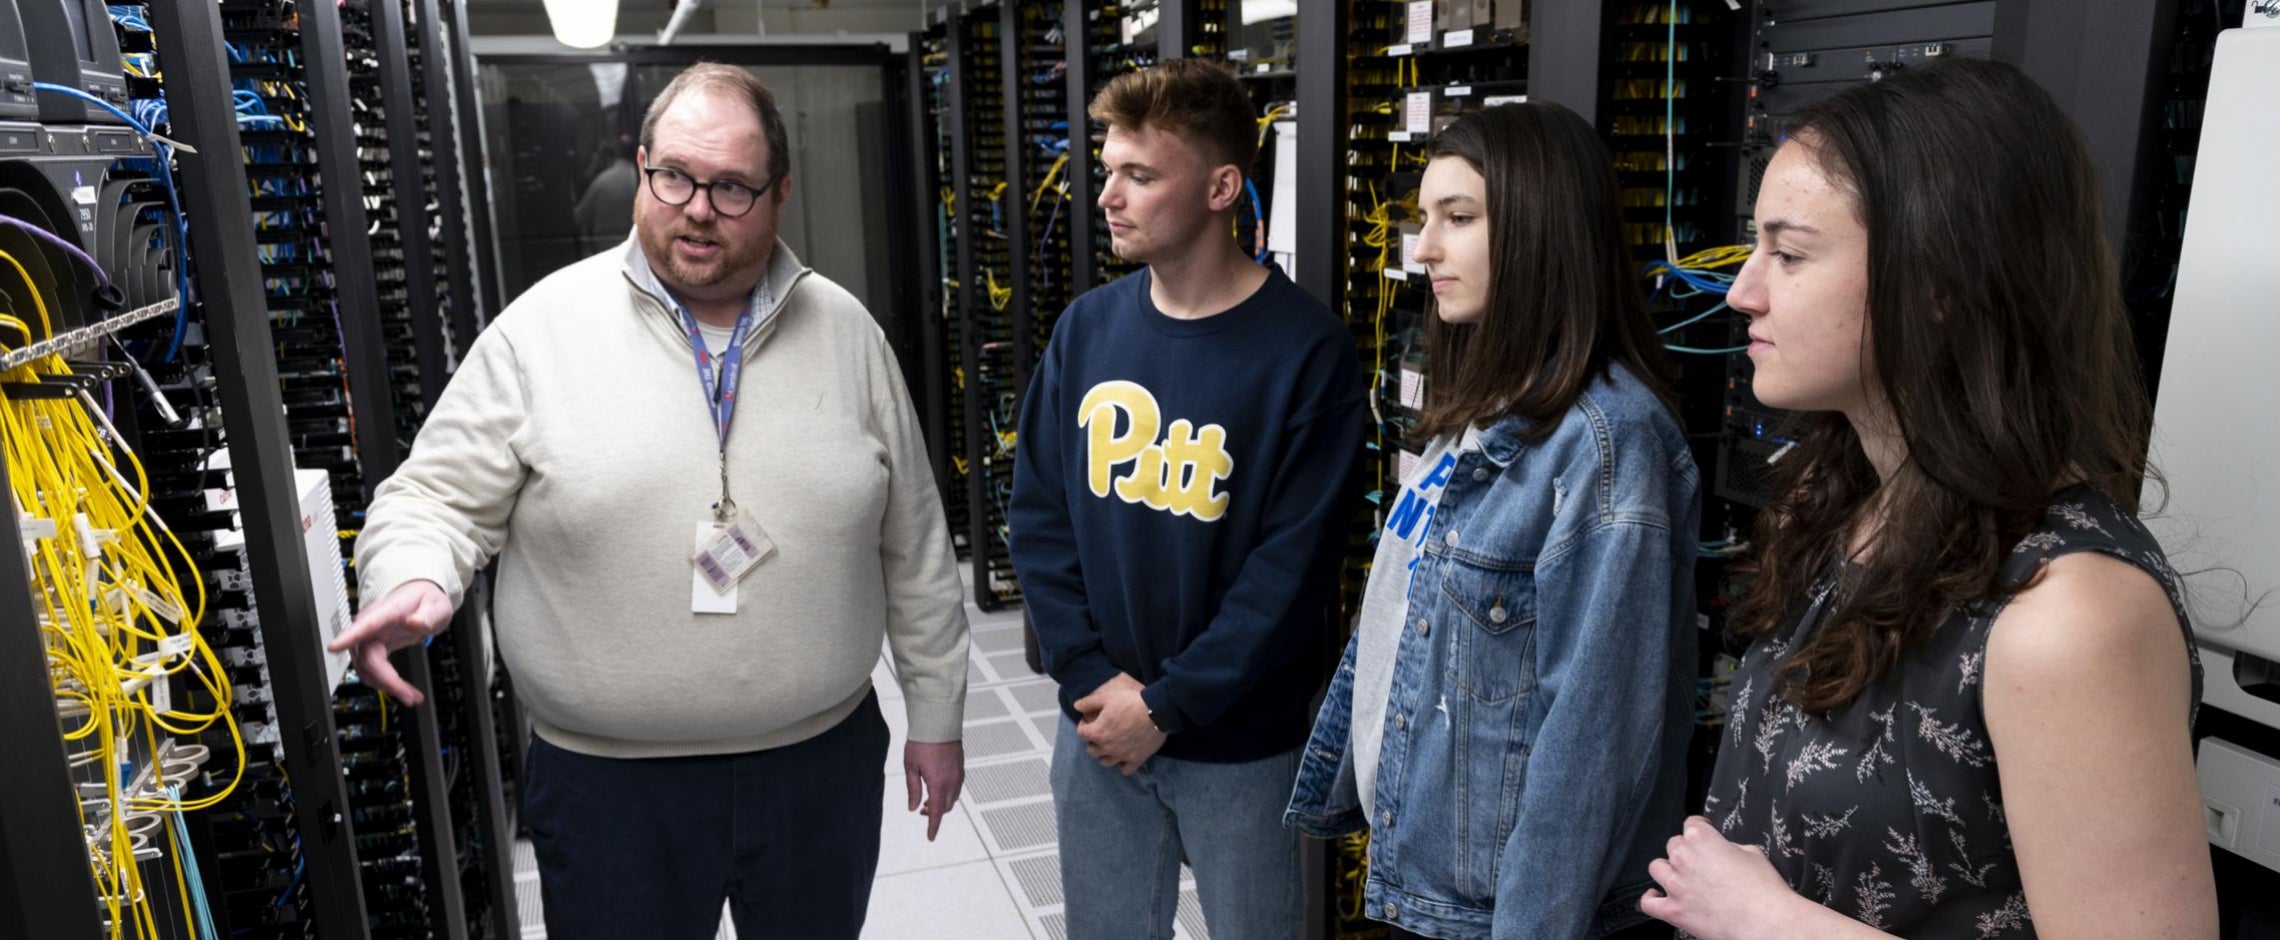 Health Informatics (BS) students take a tour of the UPMC Data Center